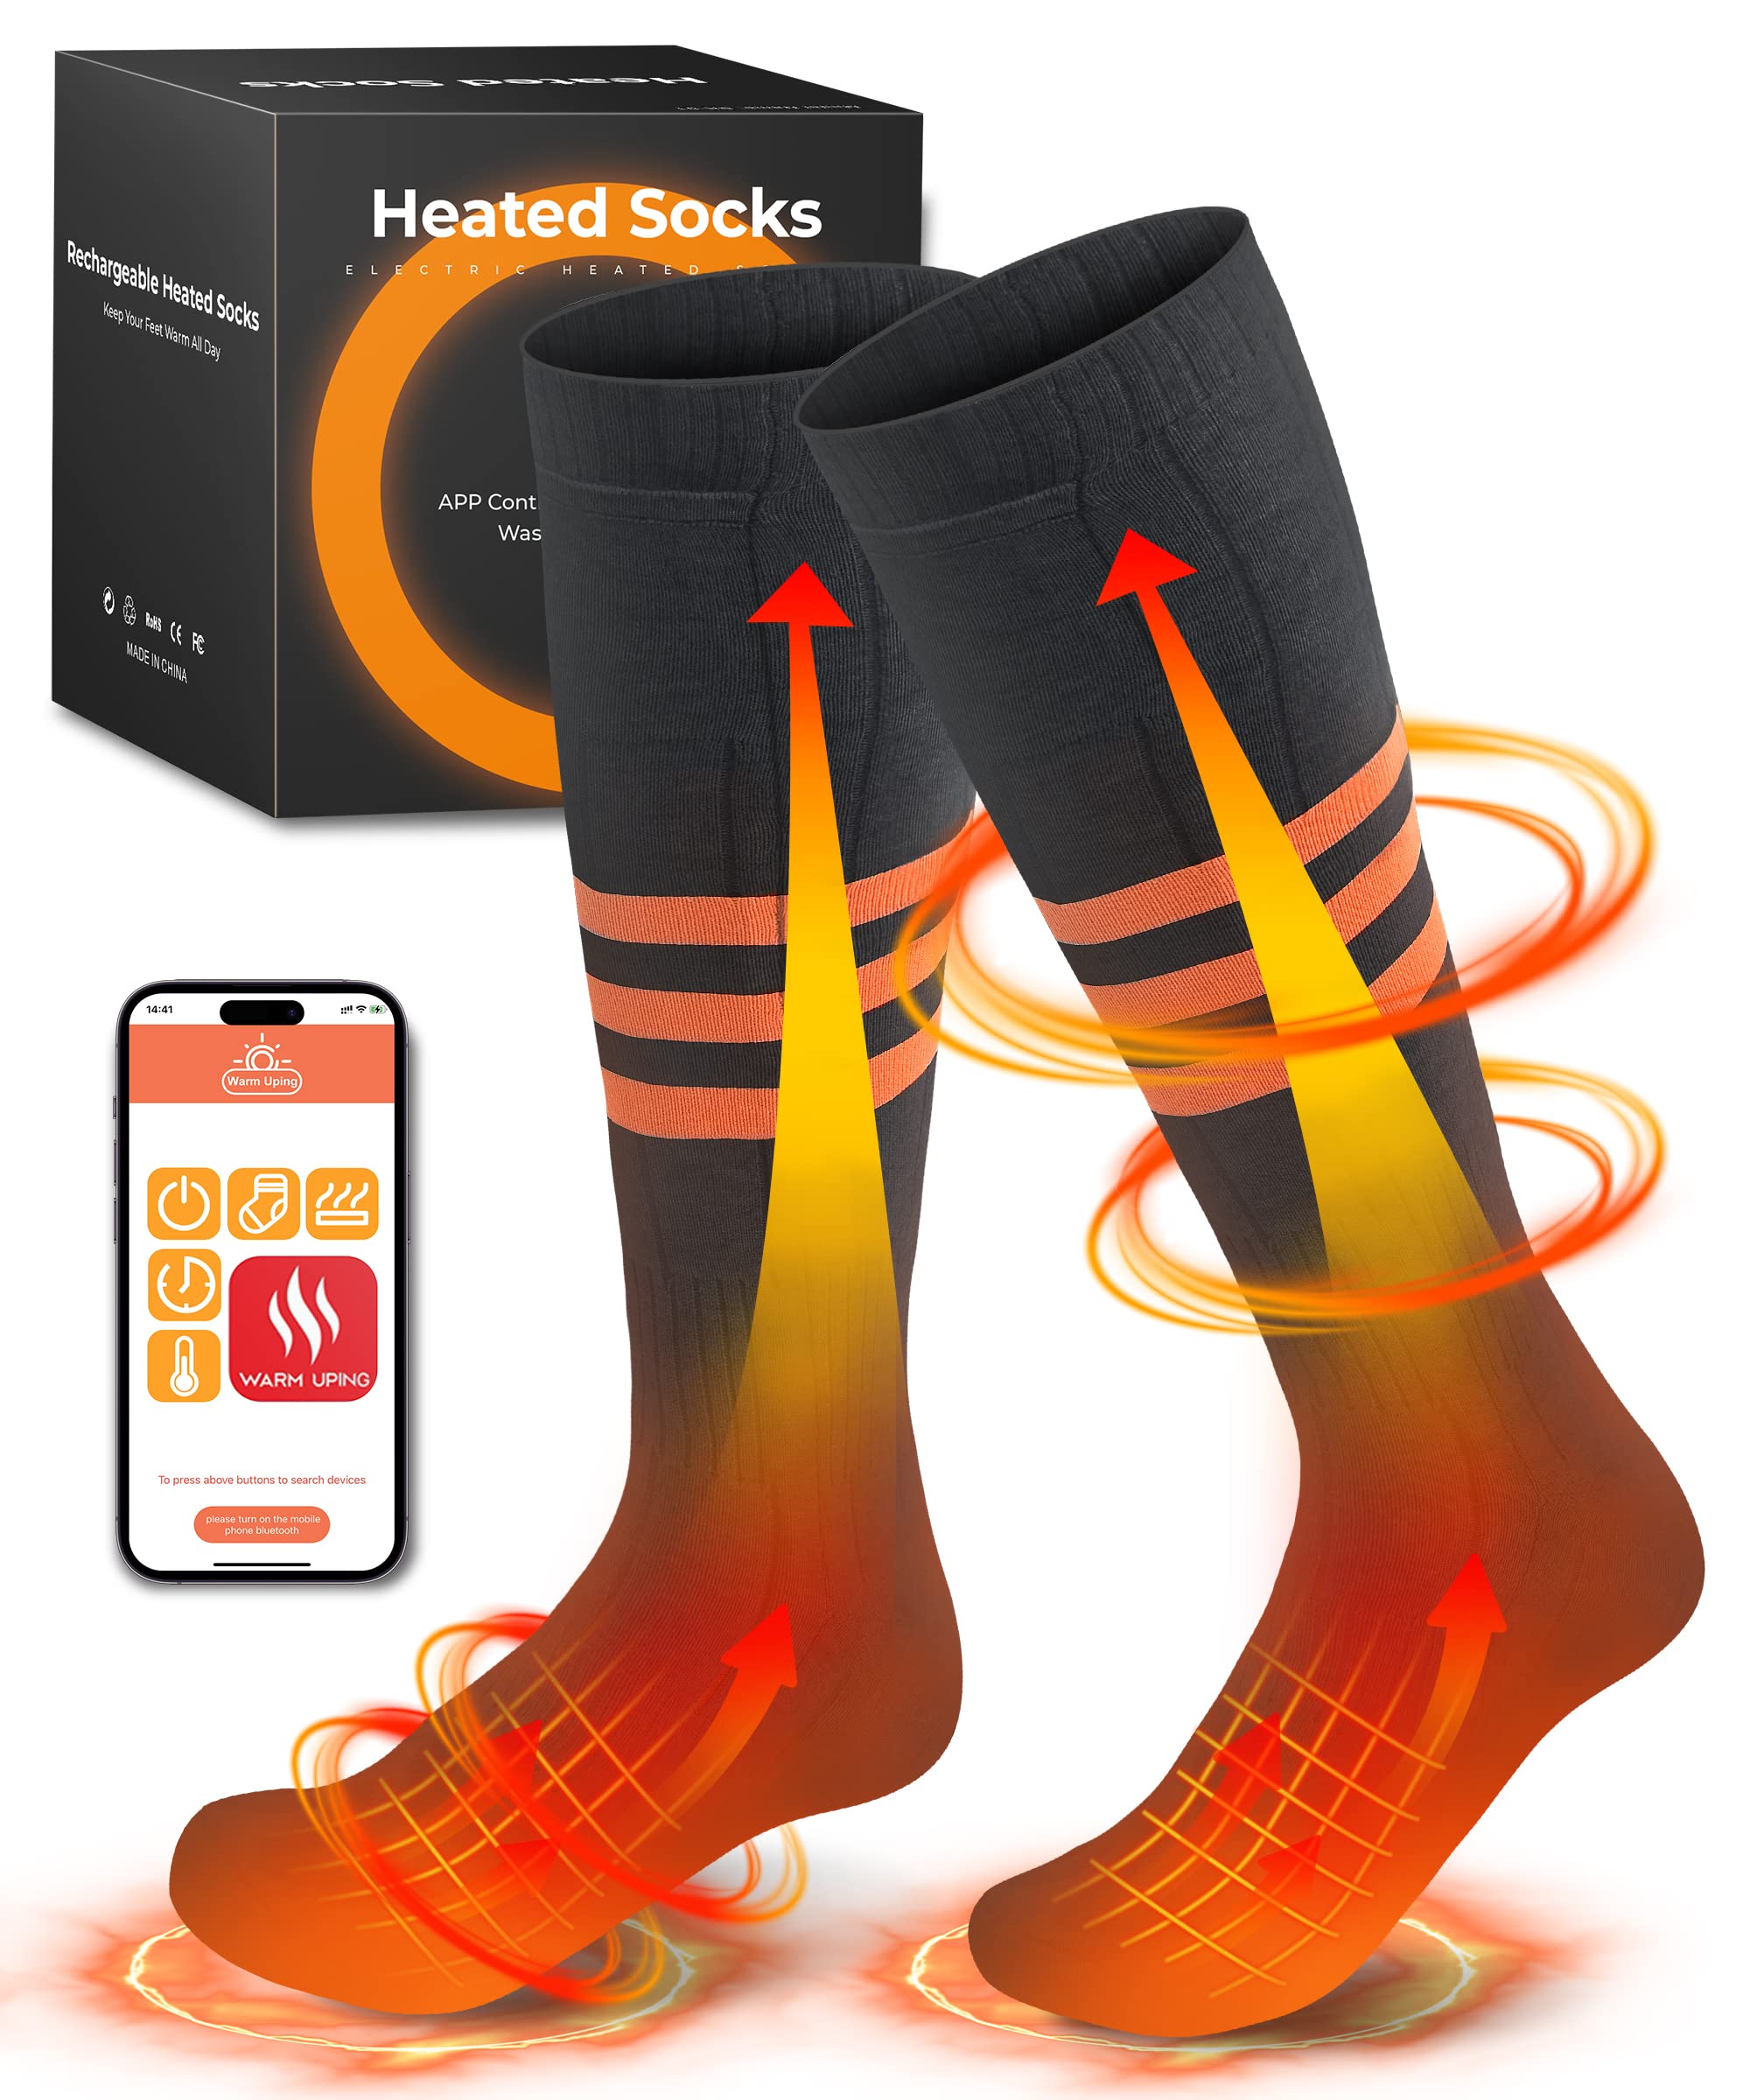 Heated Socks for Men and Women, Foot Warmers for Hunting, Camping, Skiing, Fishing, Outdoor & Indoor, TUTIVAC